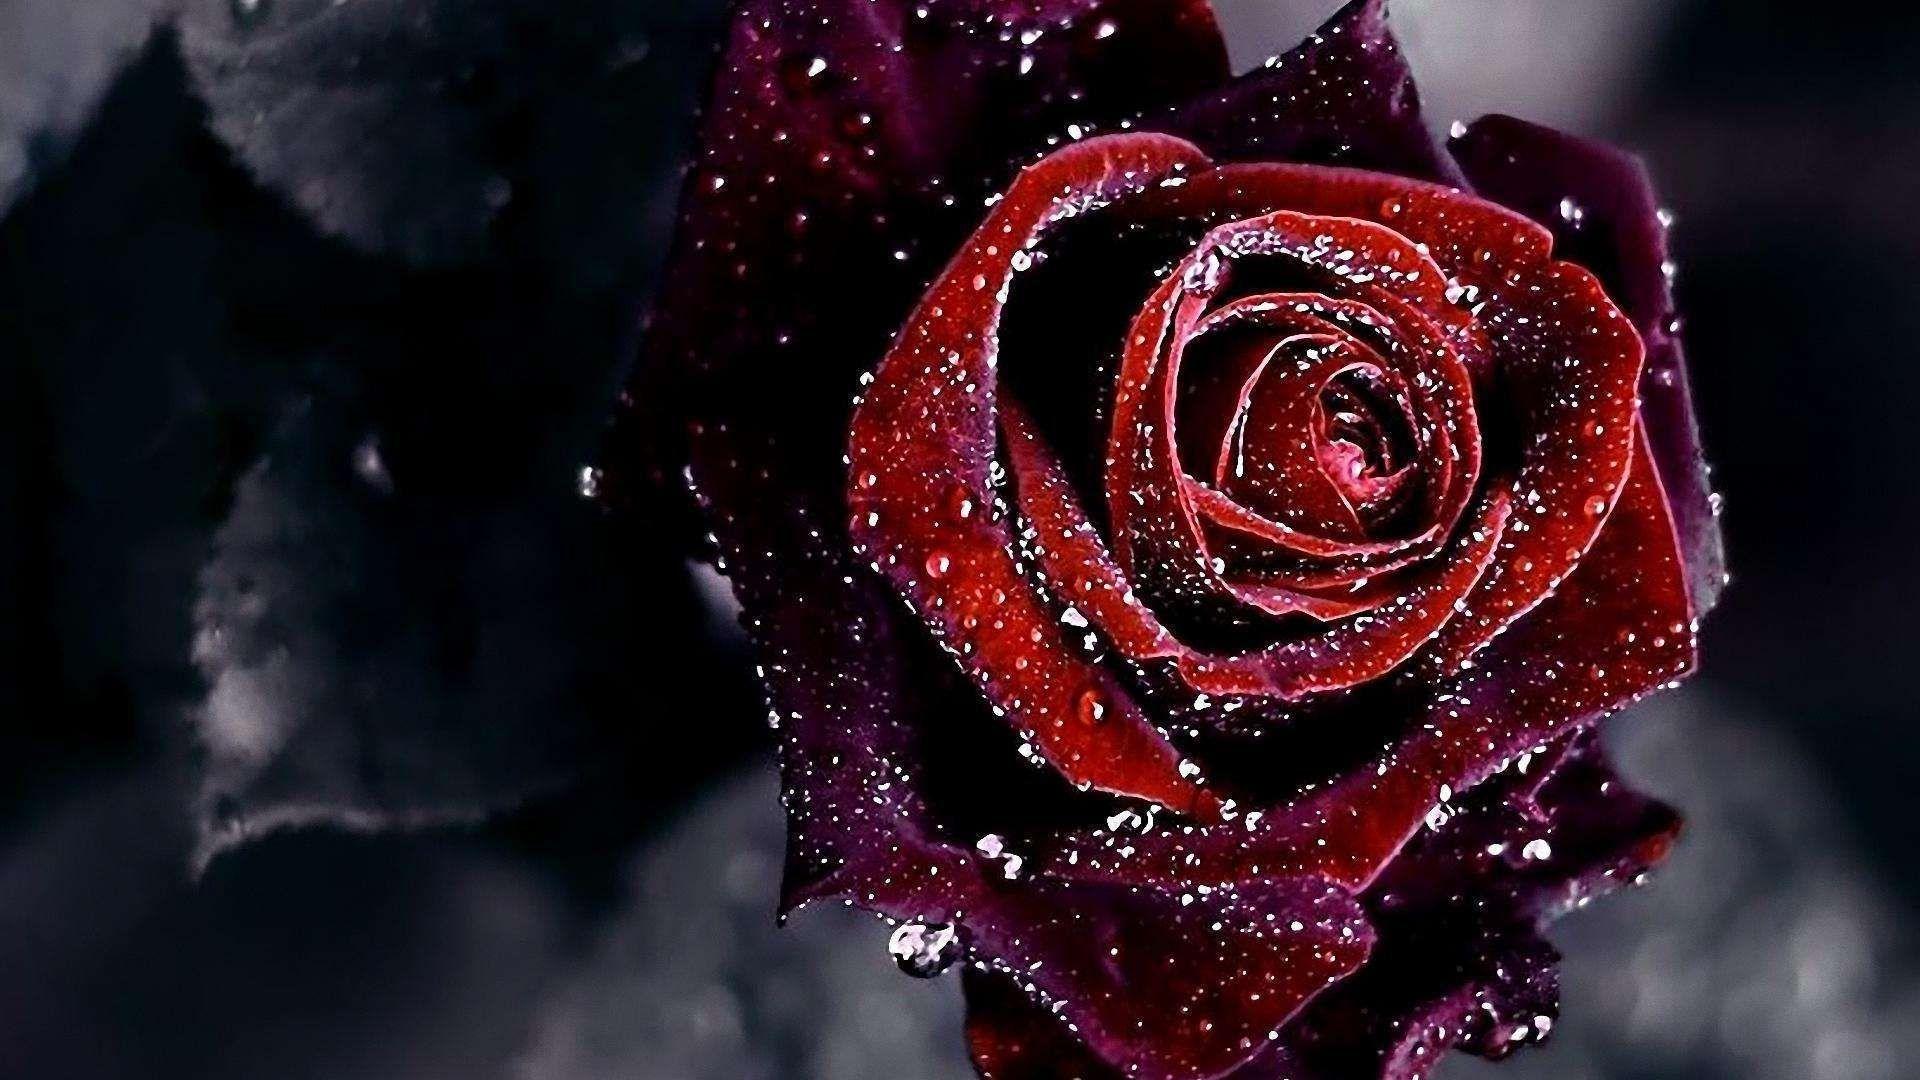 Unique Red Rose Black Background Wallpaper. The Black Posters